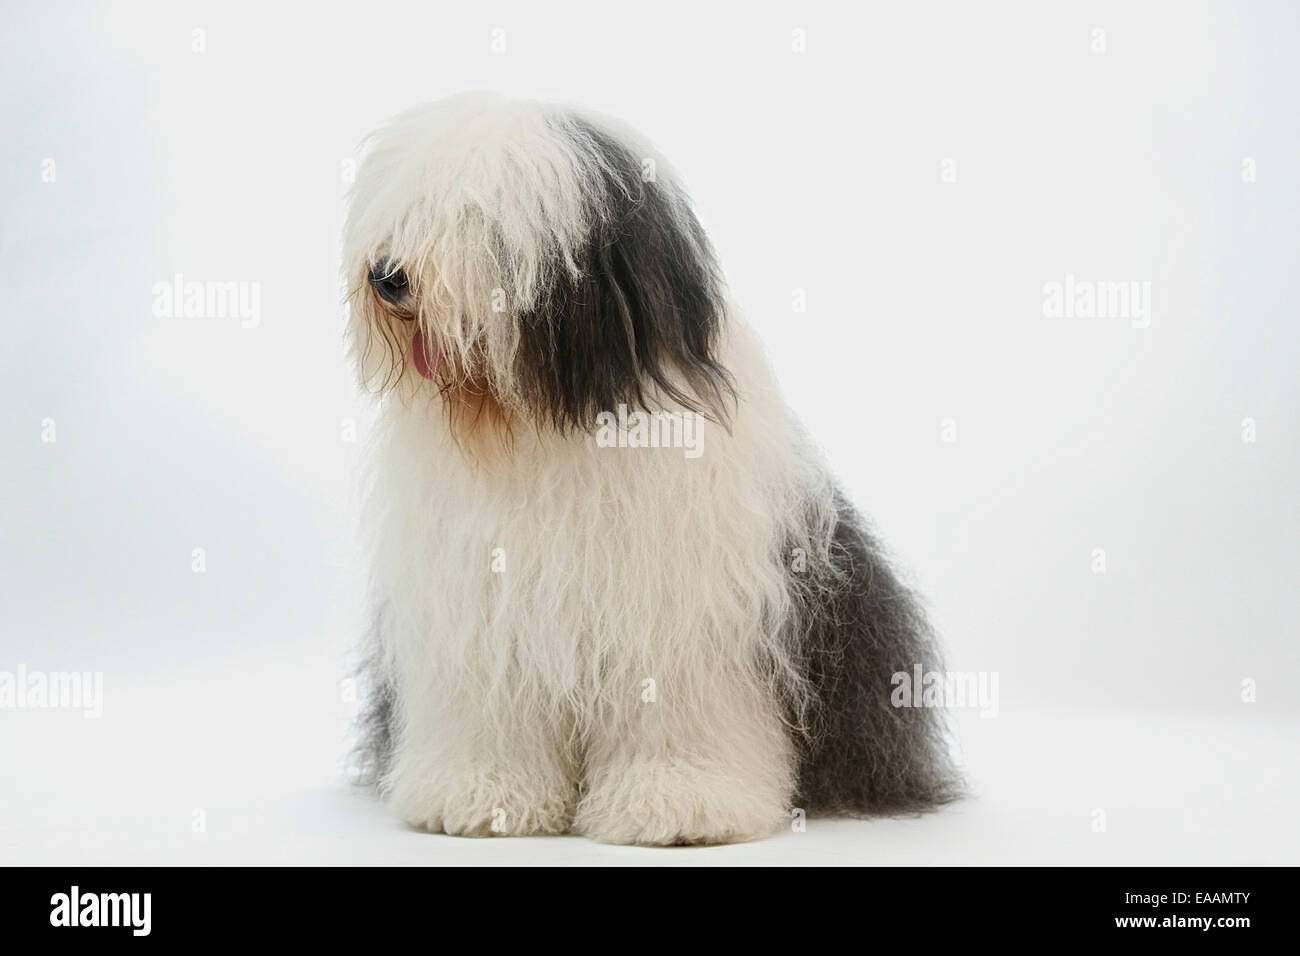 dog in dulux advert